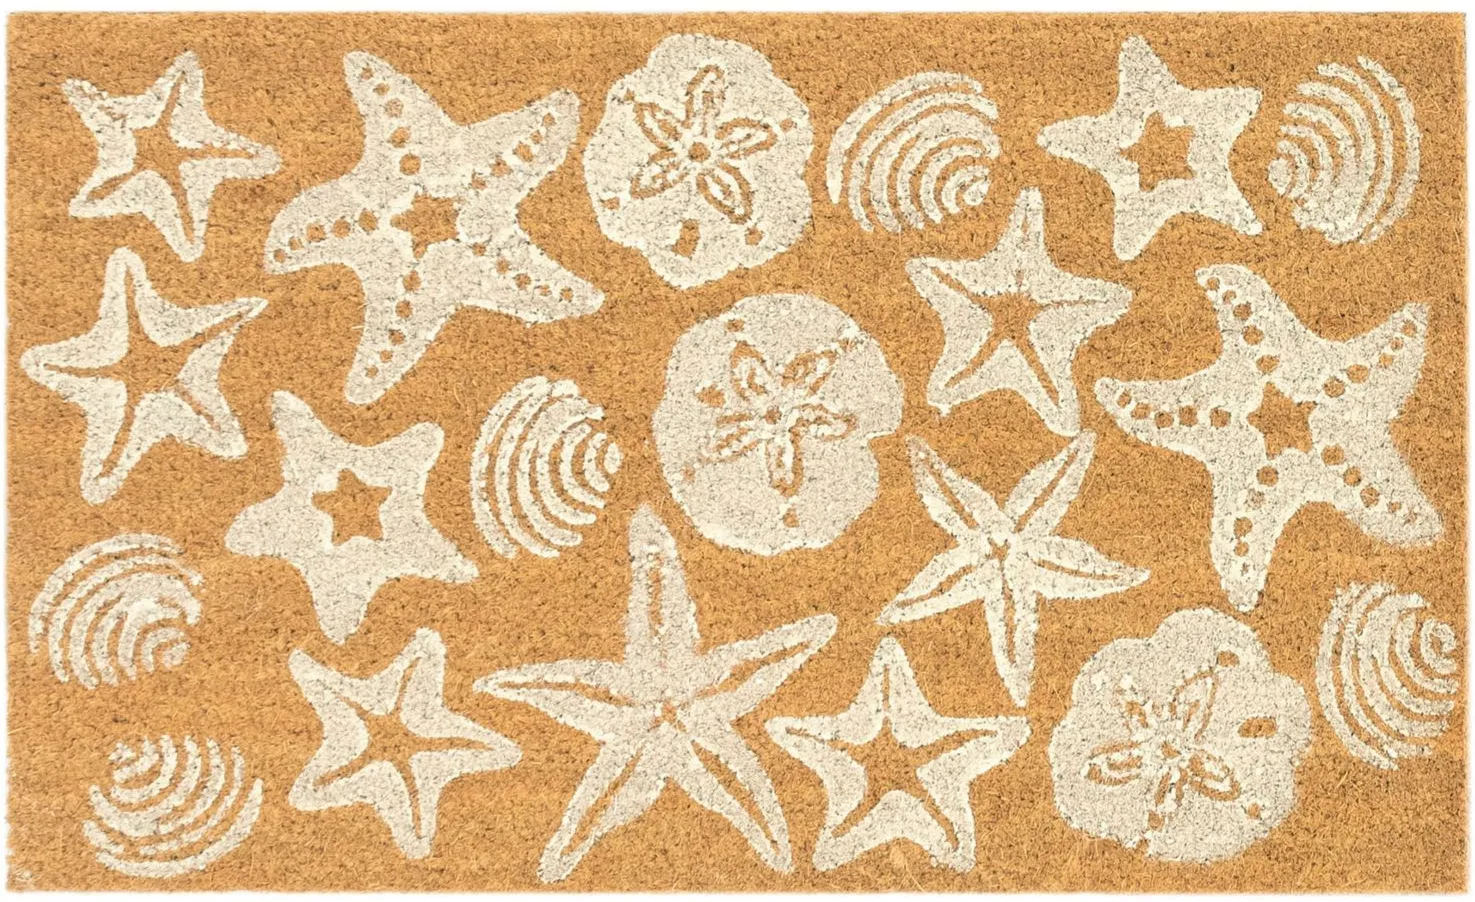 Liora Manne Natura Shells Outdoor Mat in Wheat by Trans-Ocean Import Co Inc